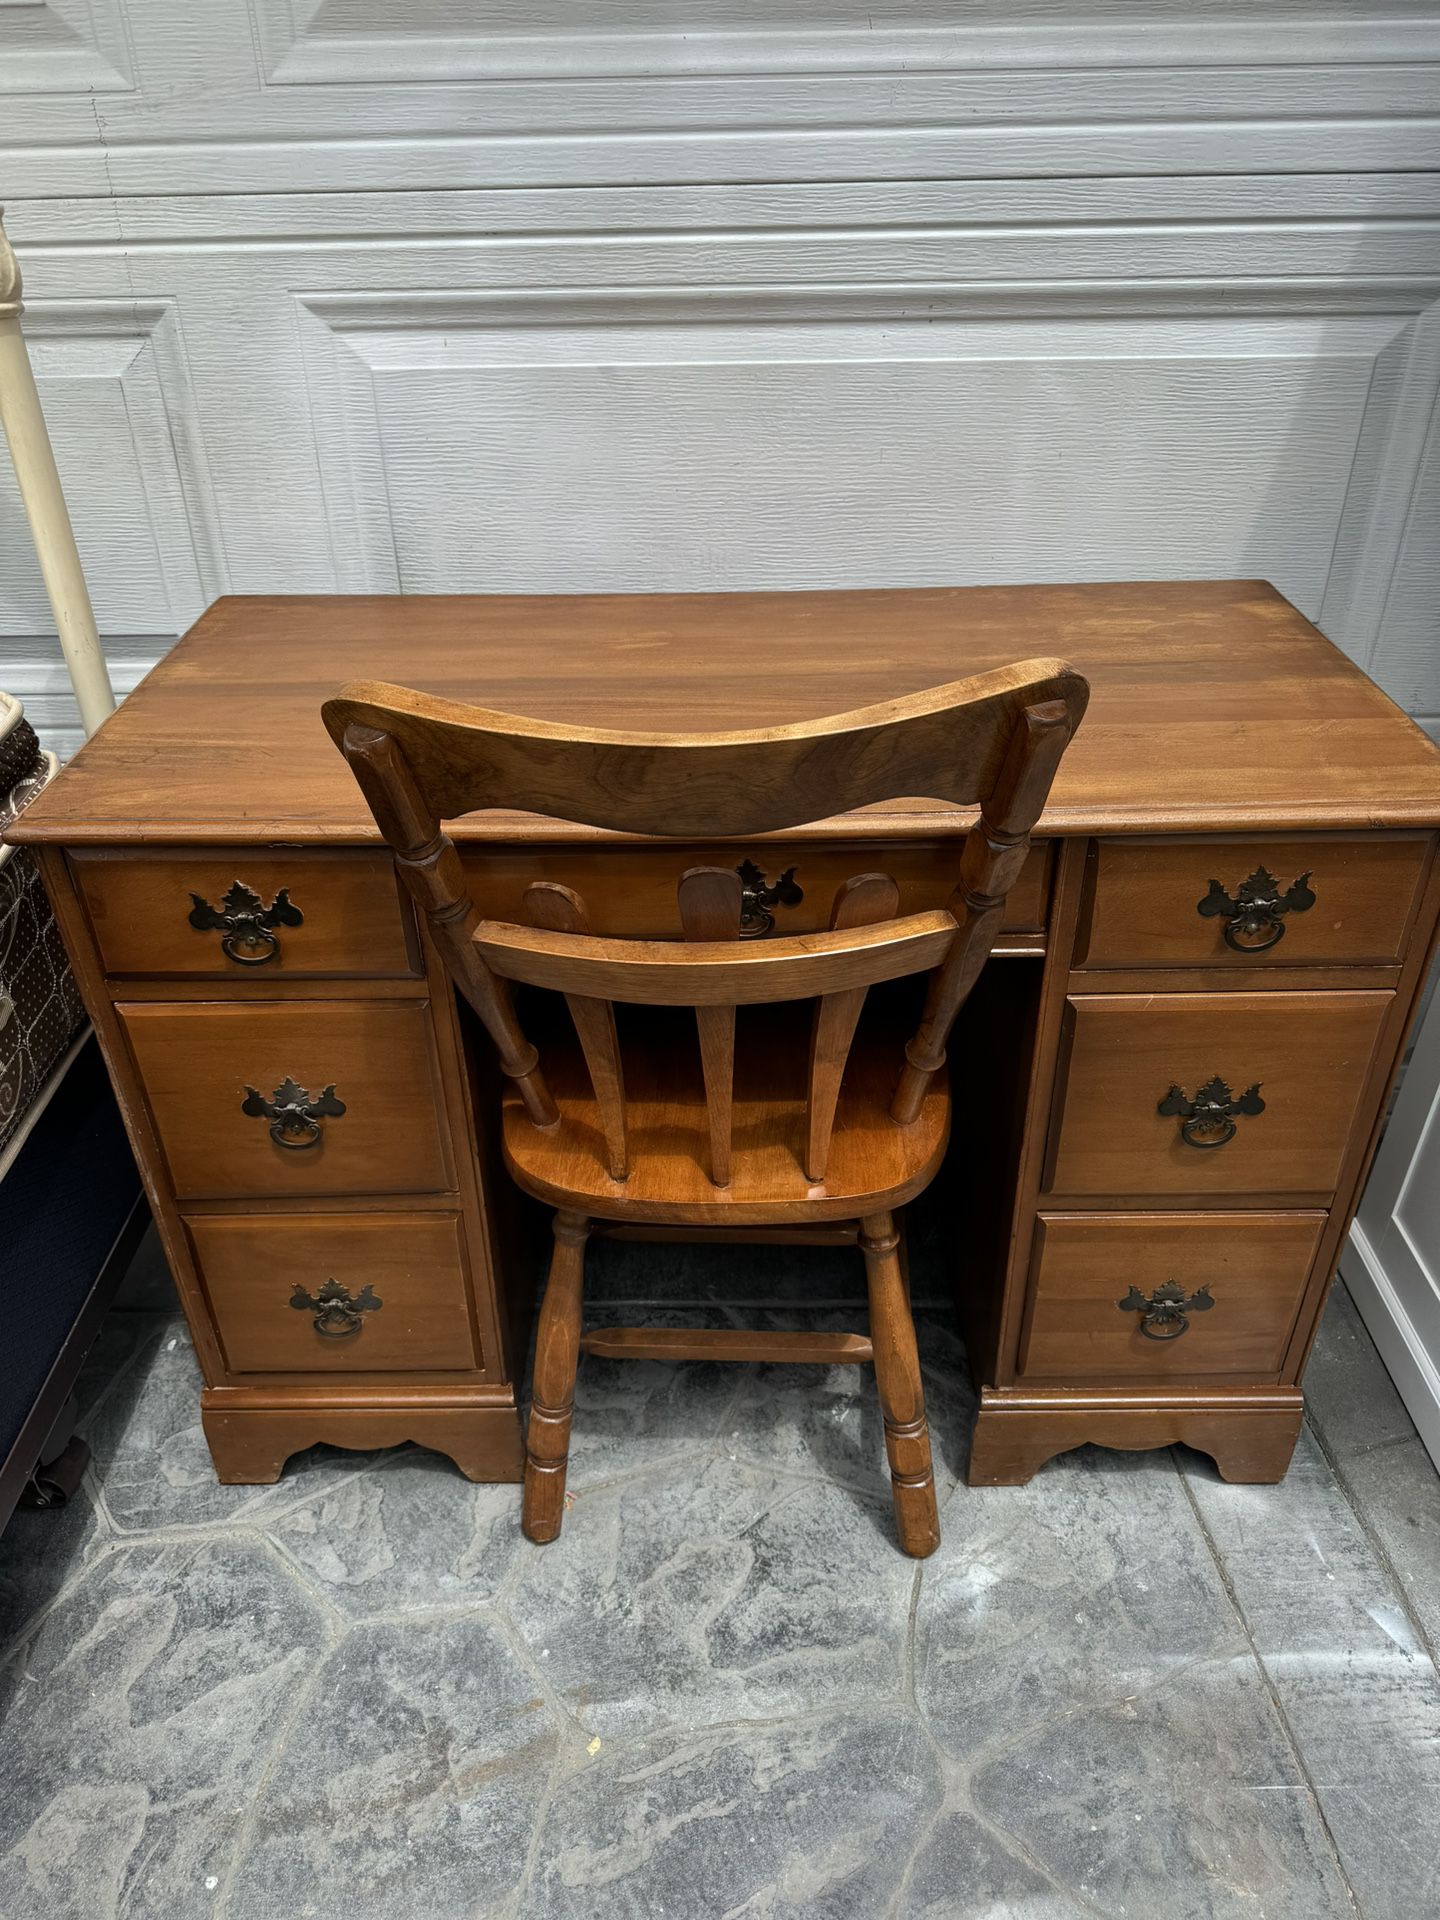 Antique solid Maple wood 7- drawer  writing desk $95, matching chair $25 . 19 deep by 41L by 29 1/2 H